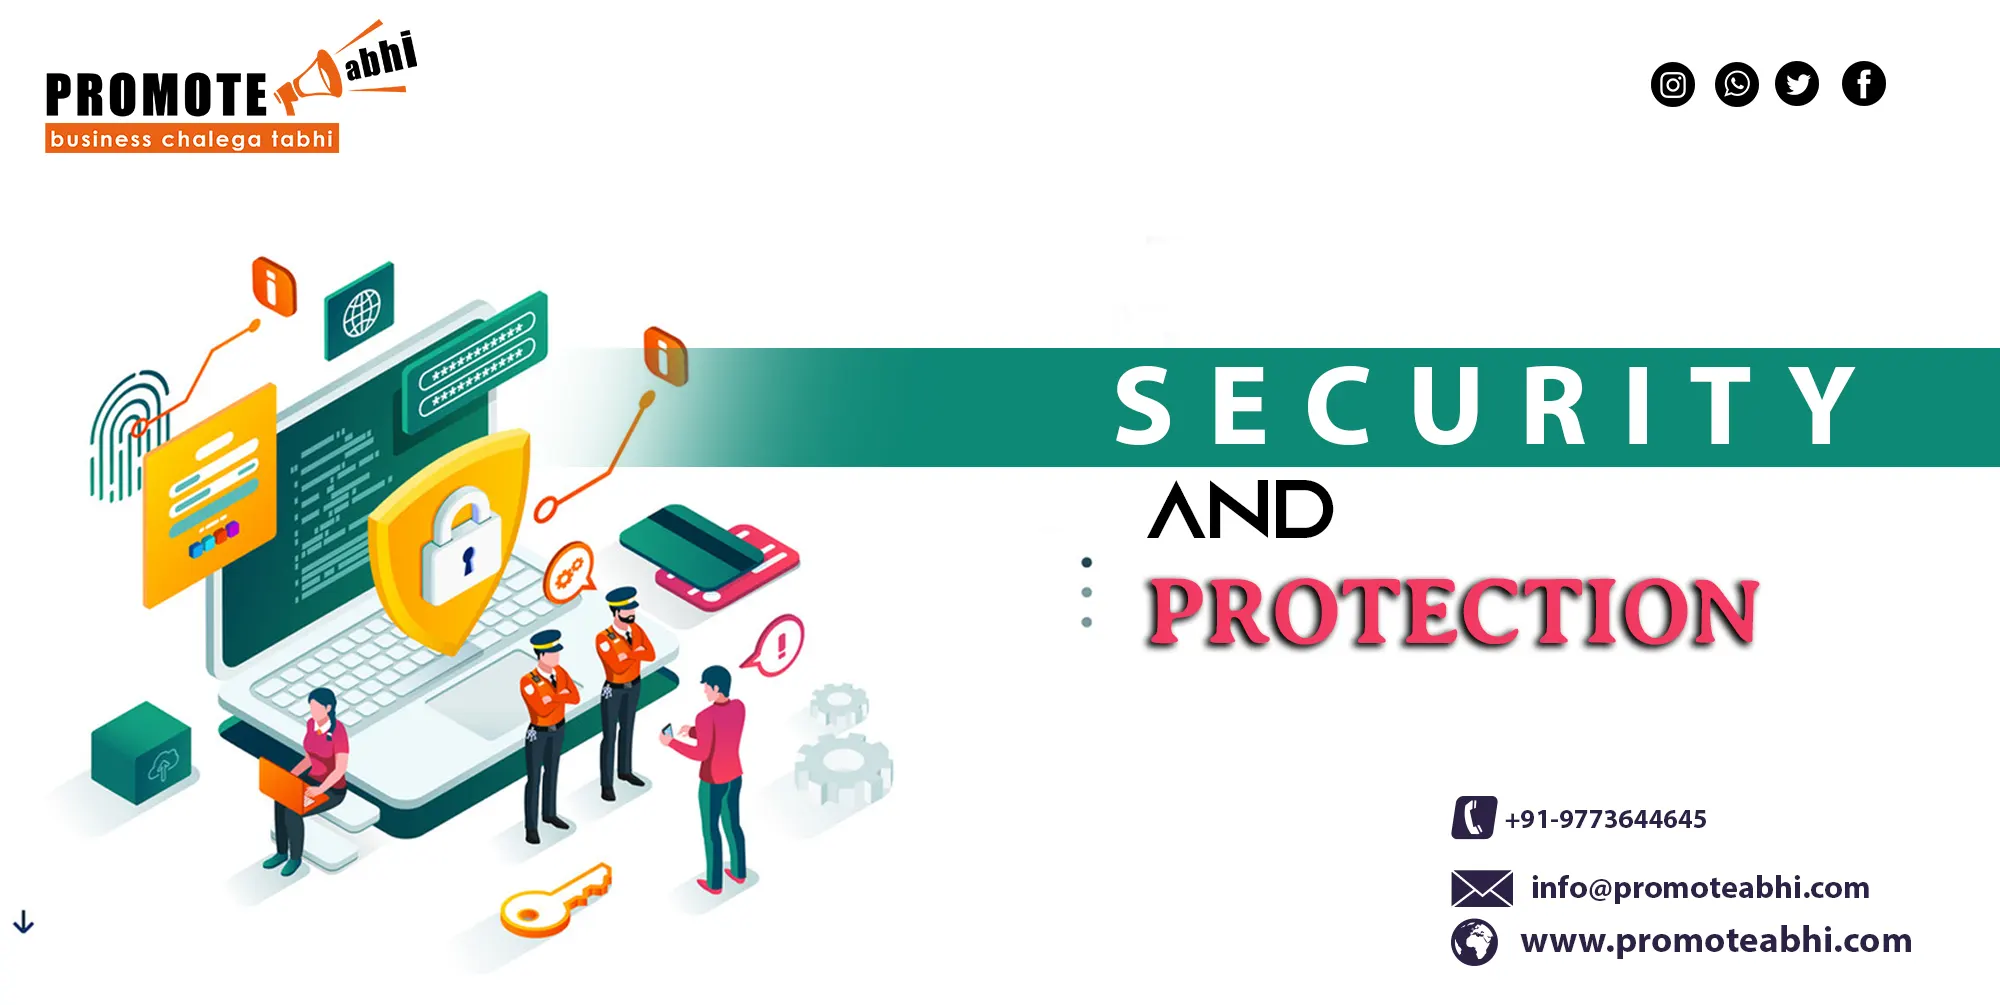 Security and Protection - App Development